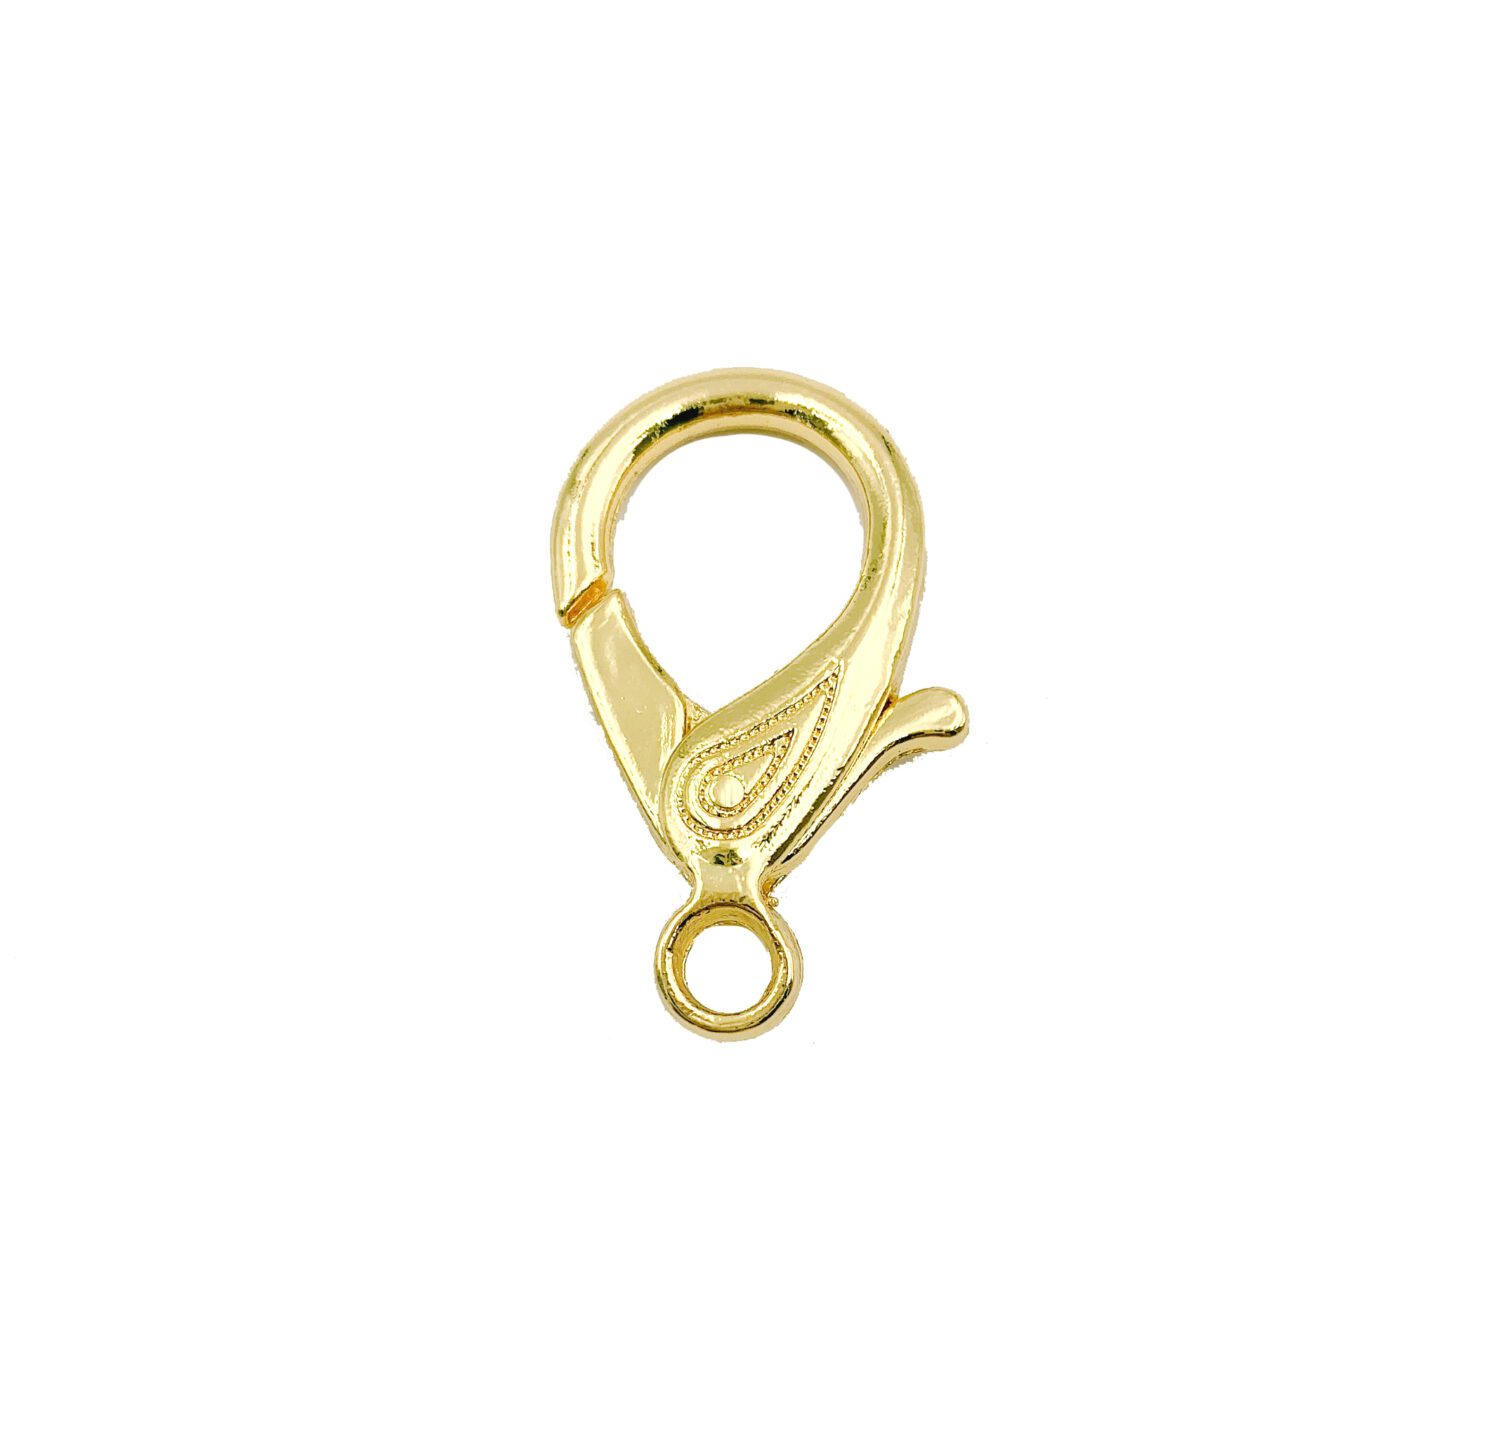 CL2532-Lobster Claw Clasp - 9x5mm Satin Hamilton Gold Plated